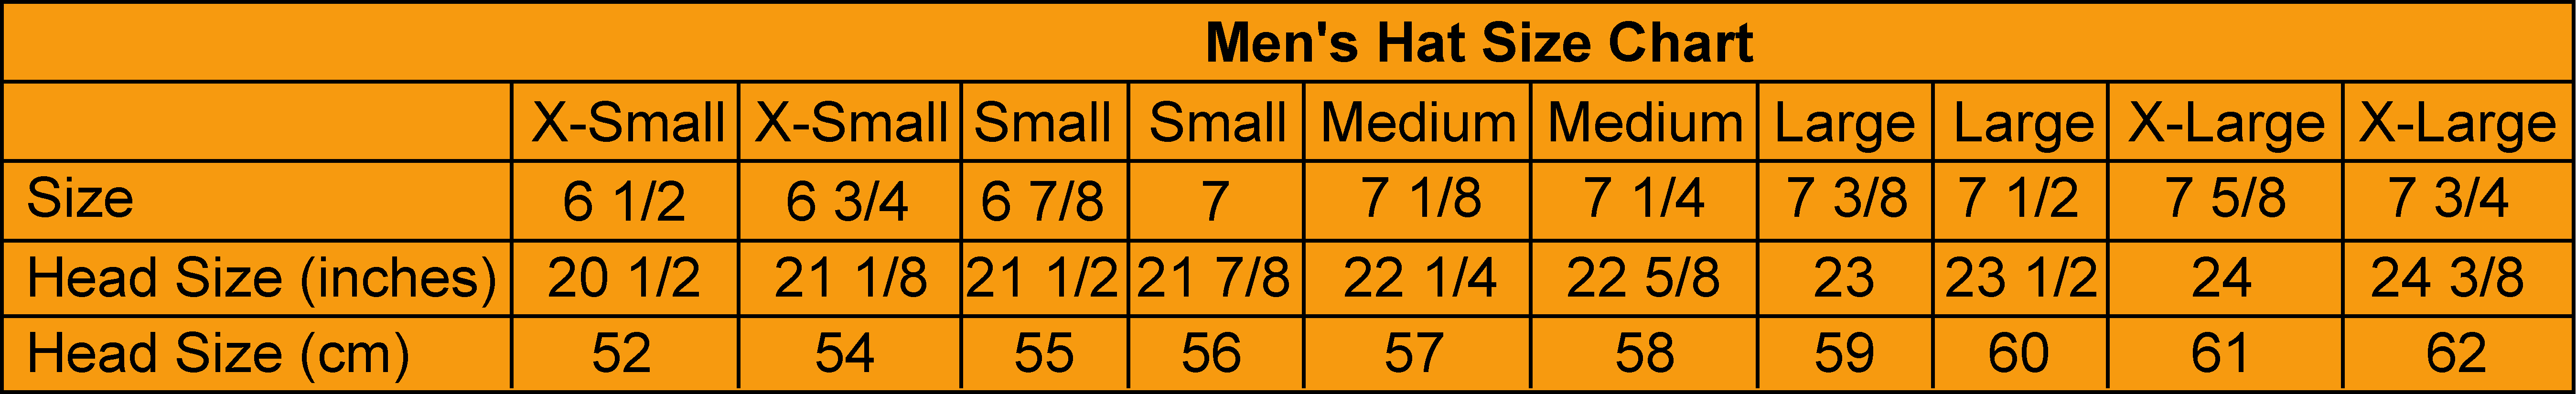 Our Men's Clothing Size Guide